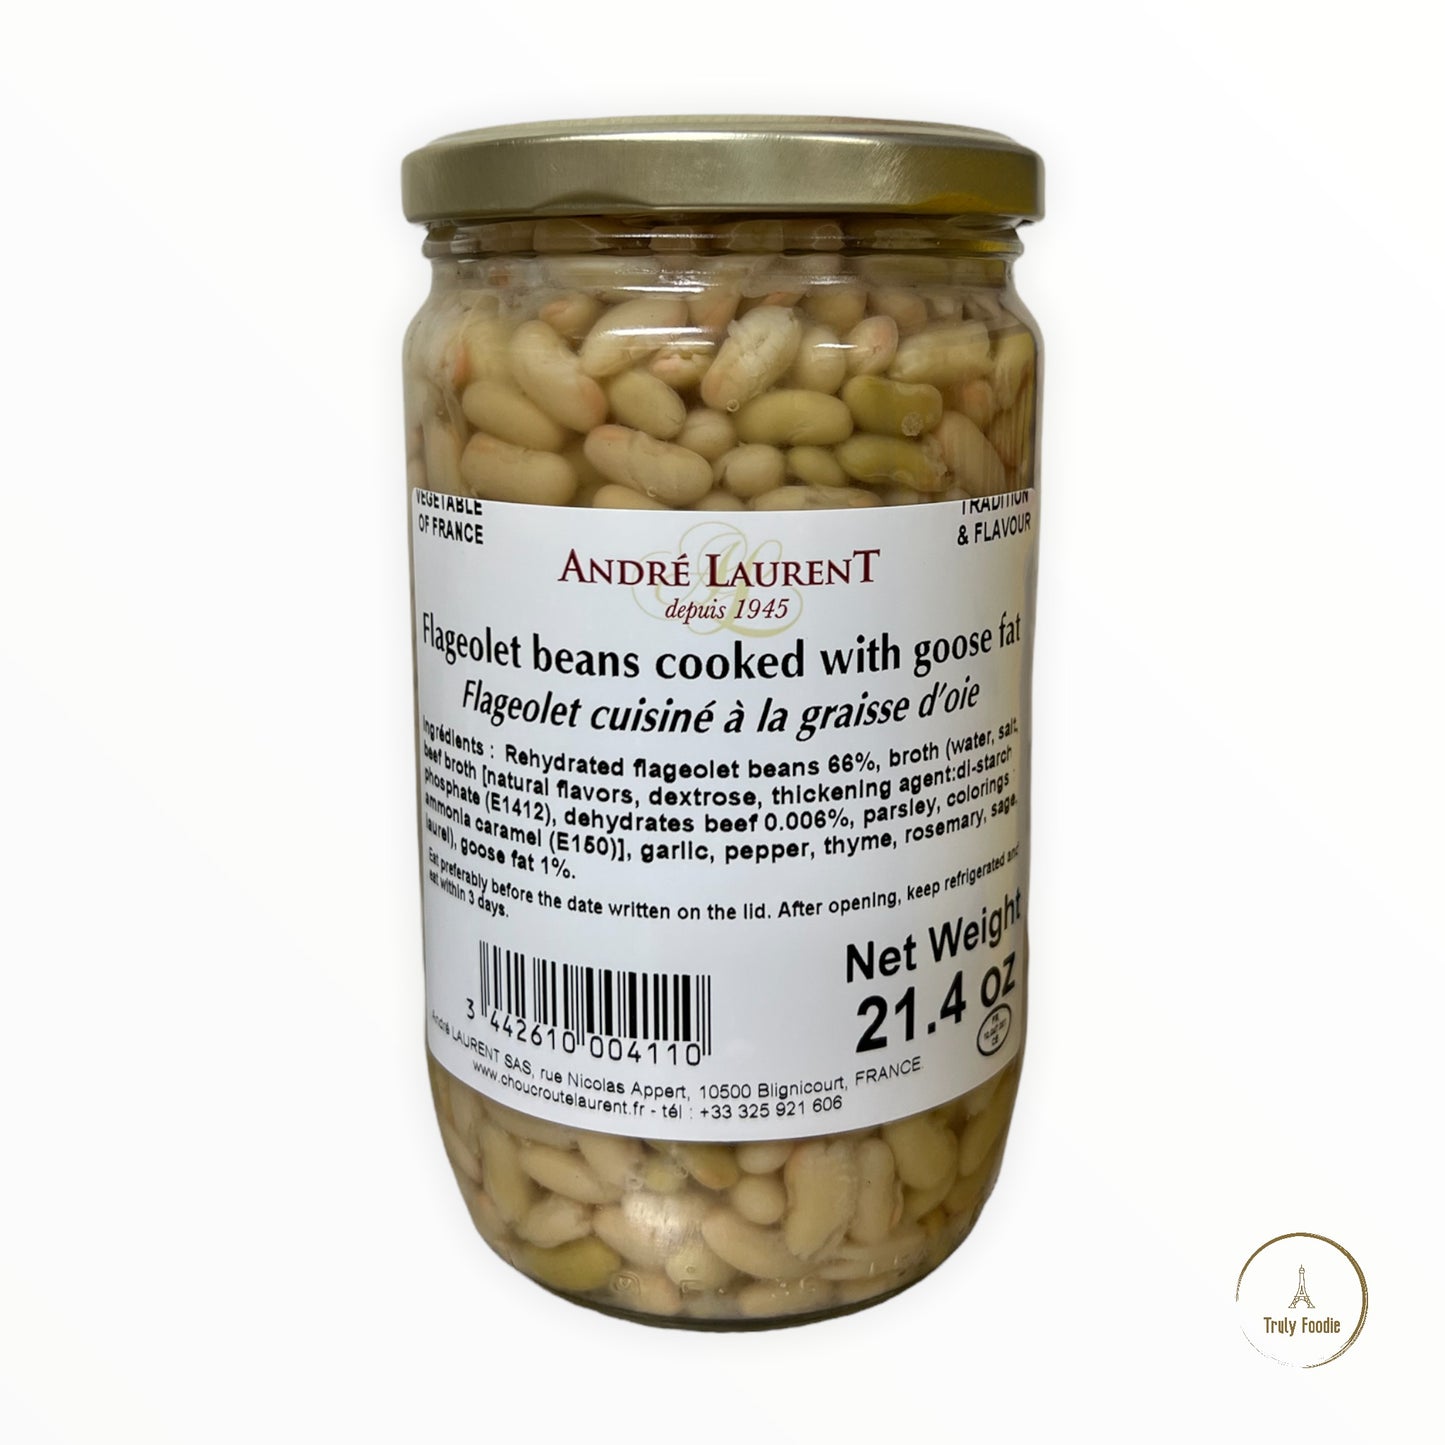 André Laurent Flageolet Beans Cooked in Goose Fat, 21.4 oz